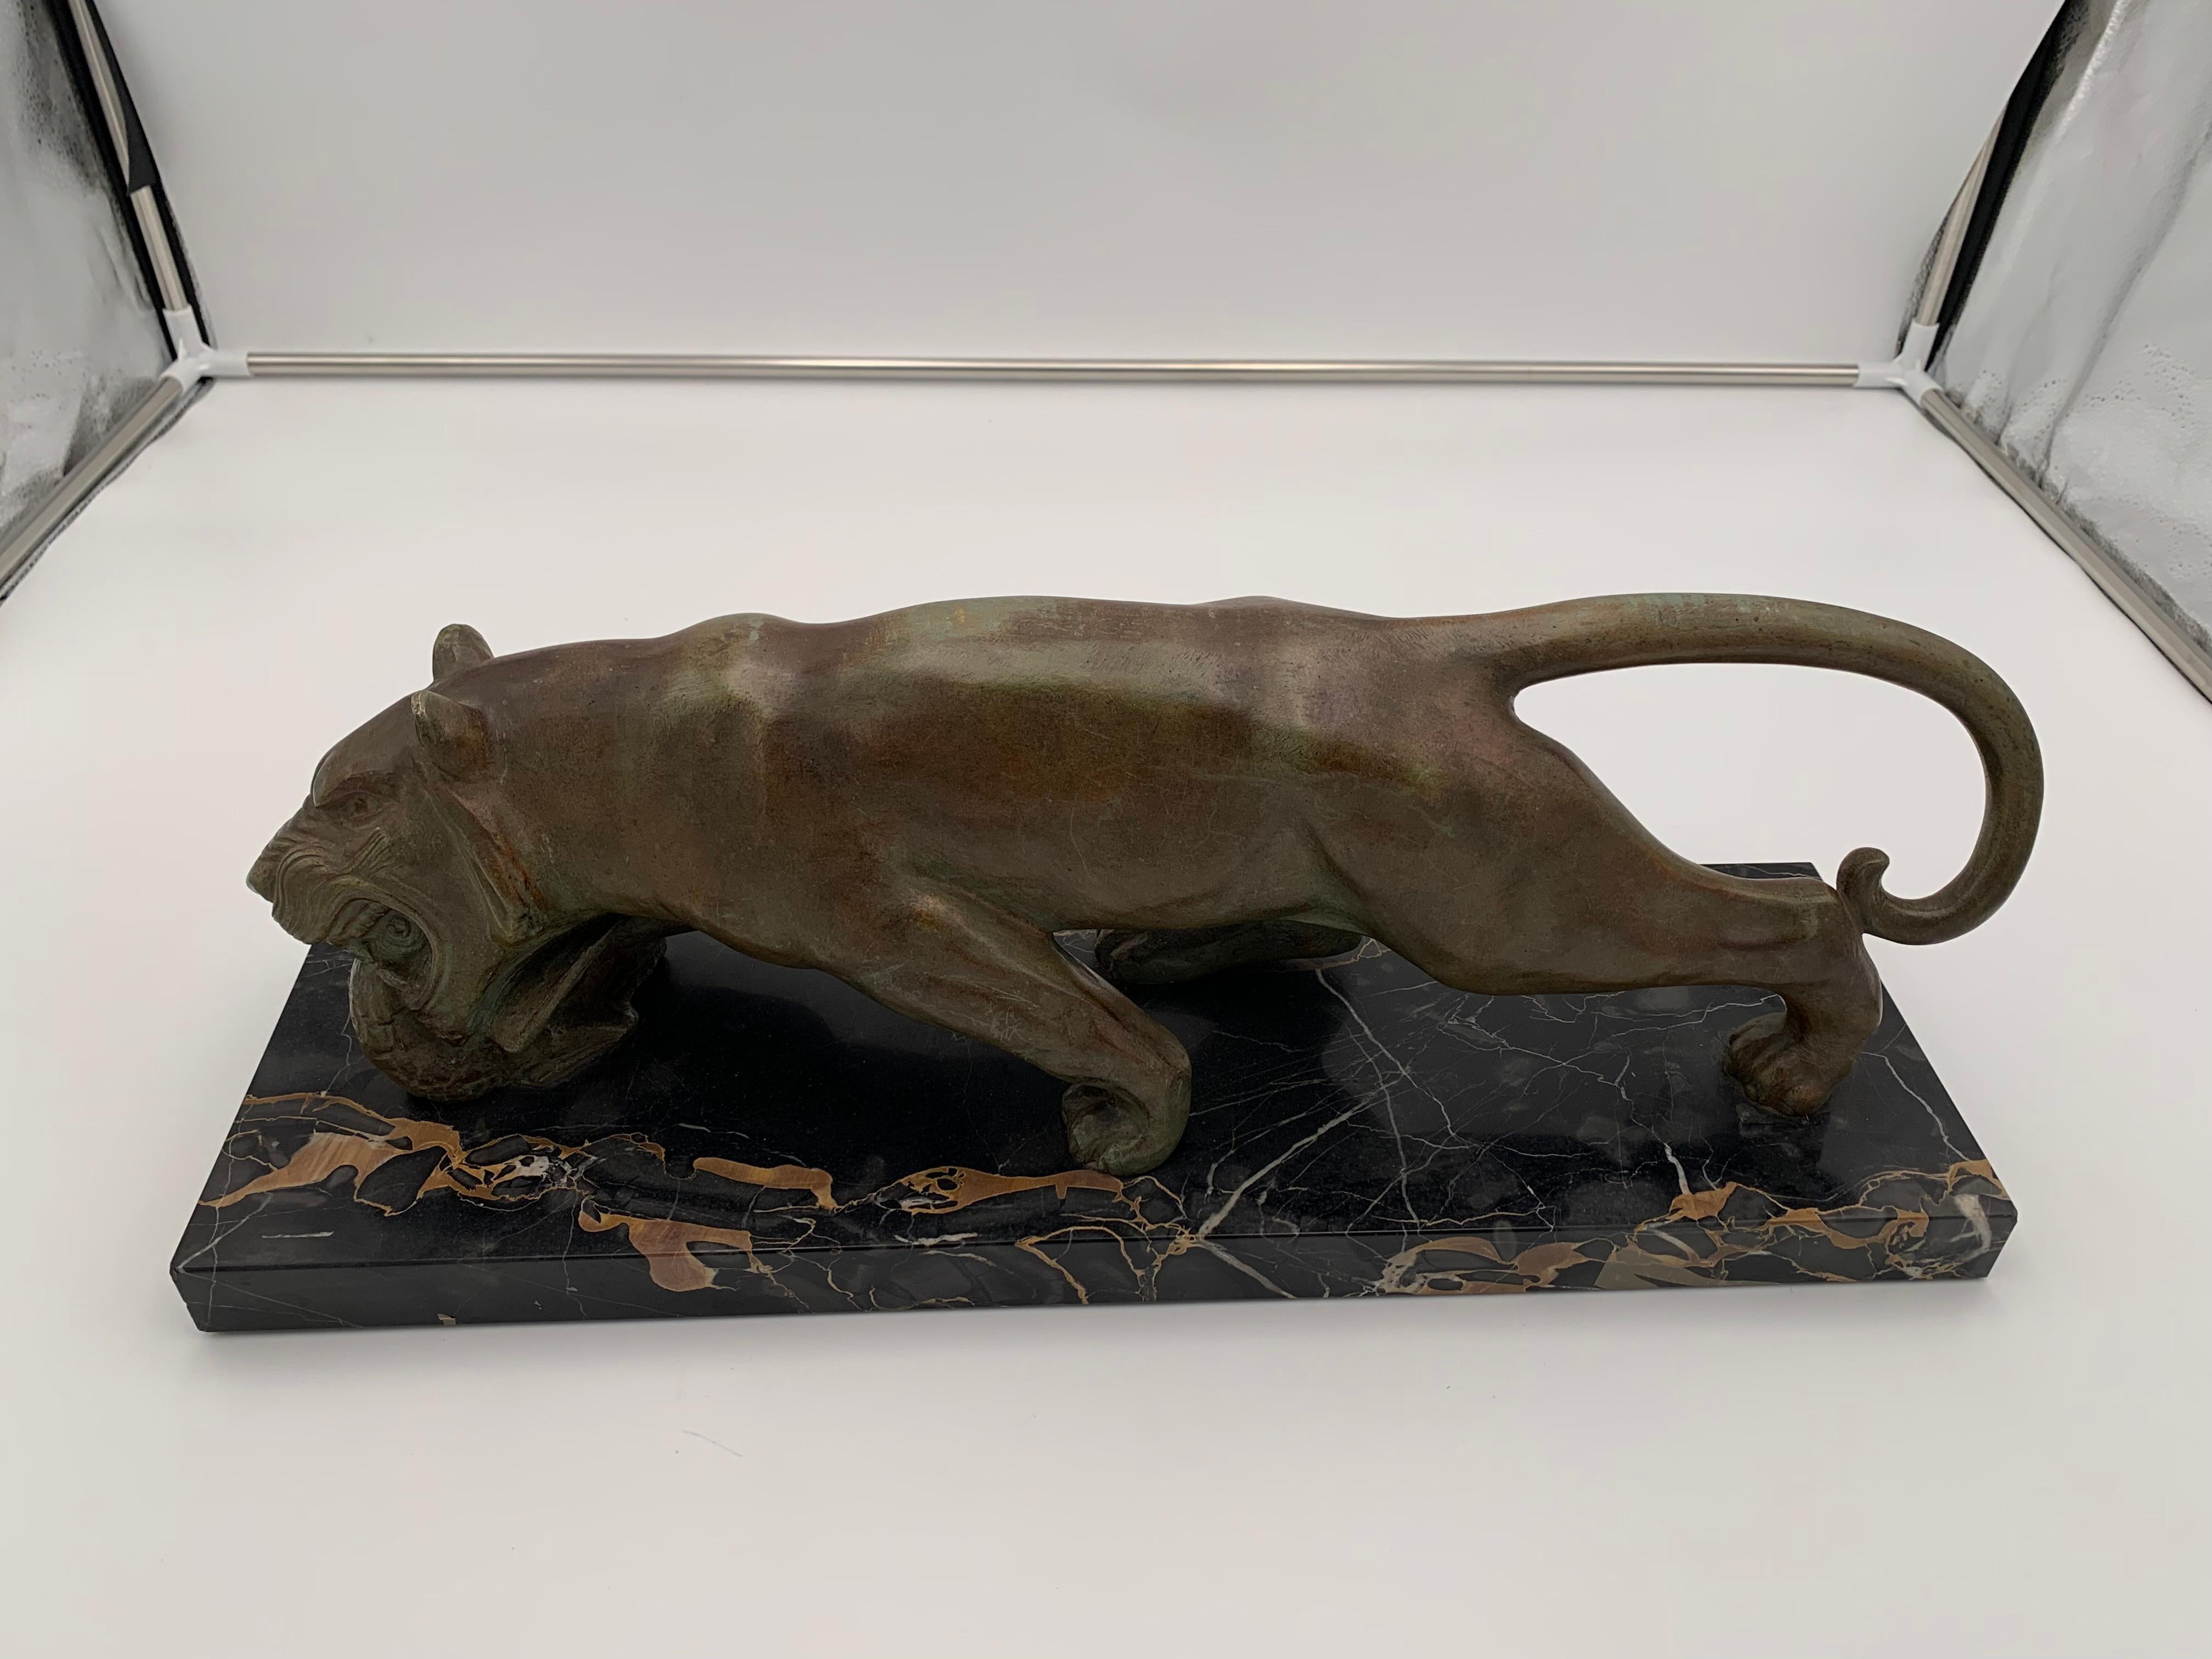 Signed high-quality heavy Art Deco Bronze Sculpture of an eating Big Cat, Panther or Lioness from France about 1930.
Signed: 